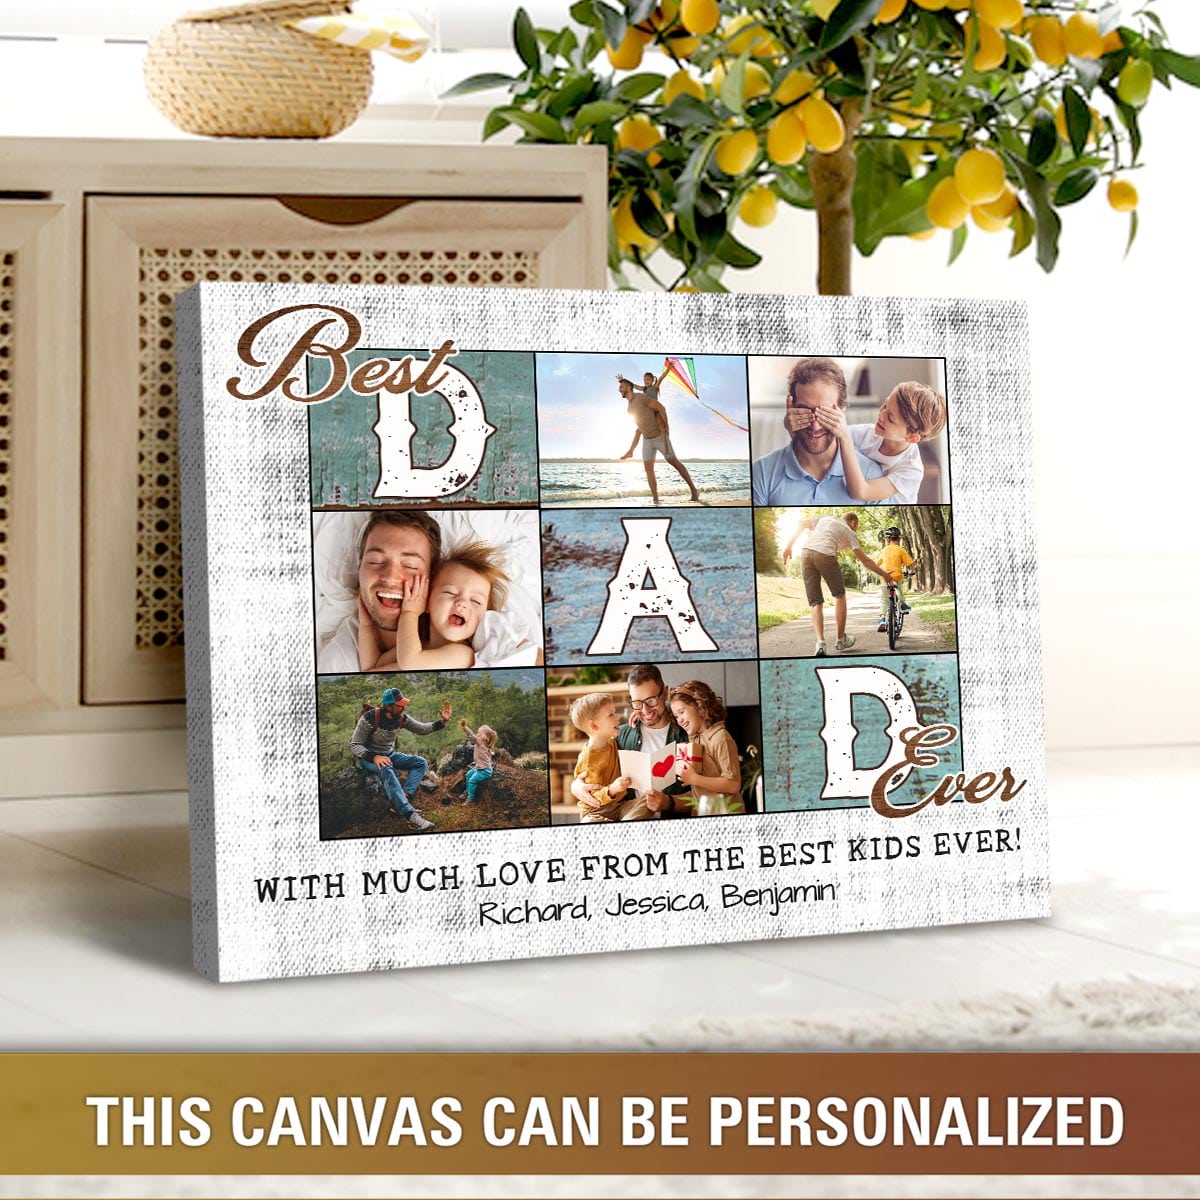 Customily School - How to sell a custom photo canvas for Father's Day!